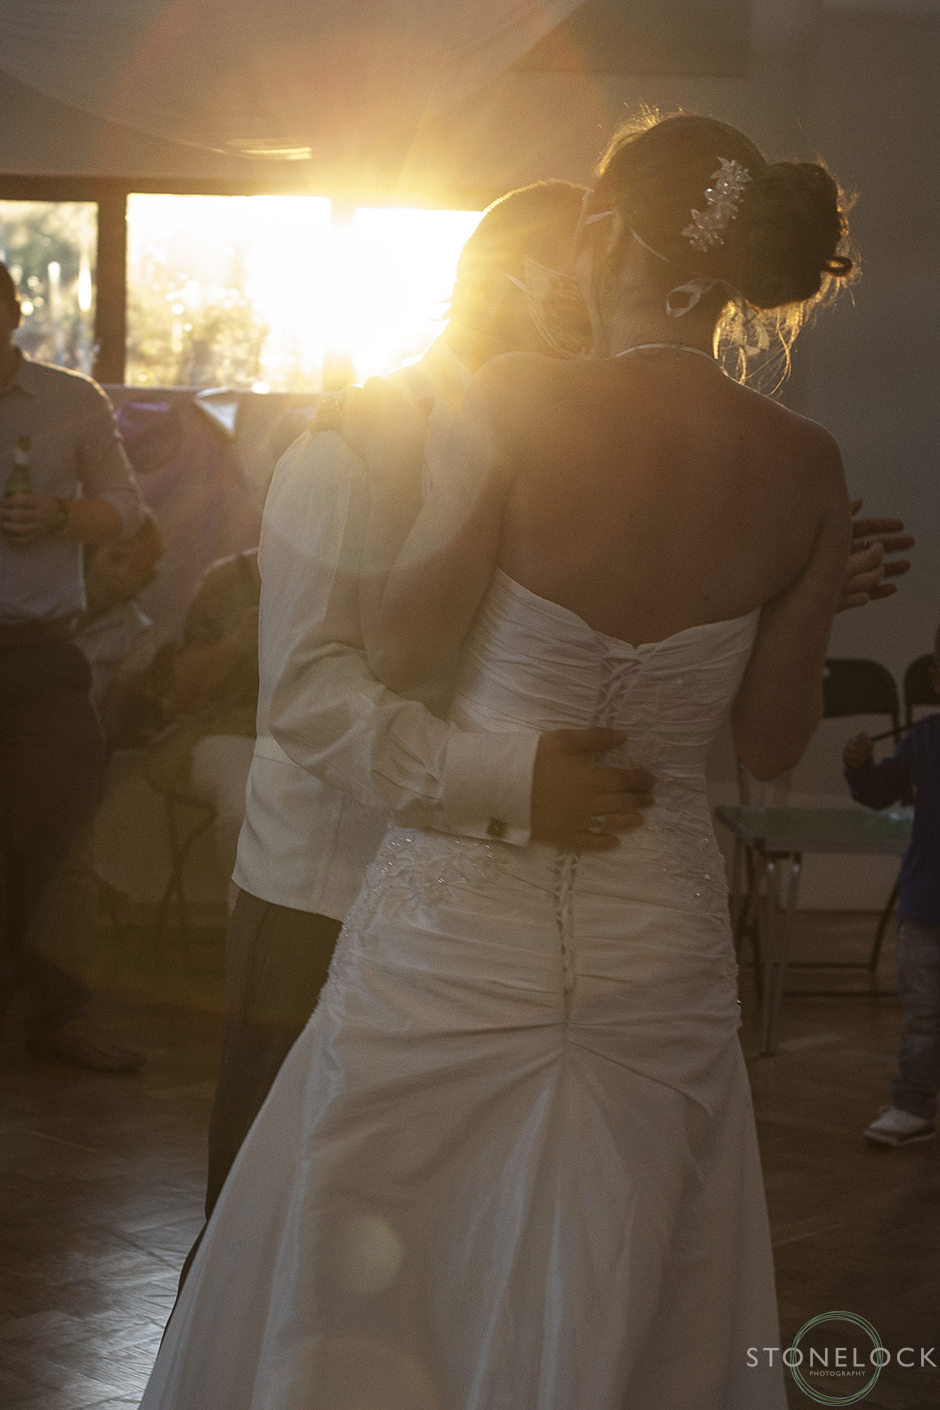 The first dance as the sun sets outside the window